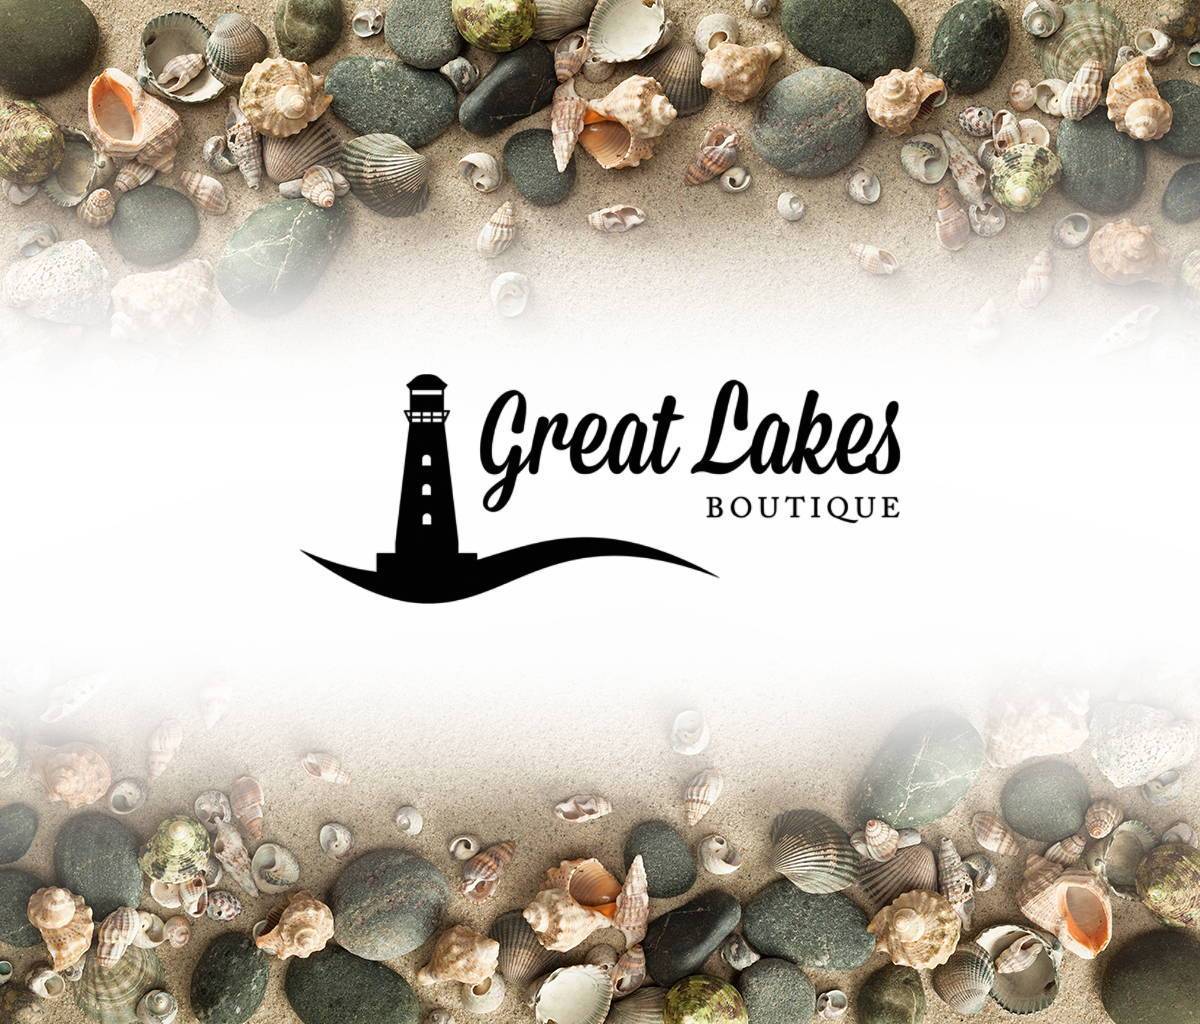 Great Lakes Boutique Trollbeads Summer Trunk Show